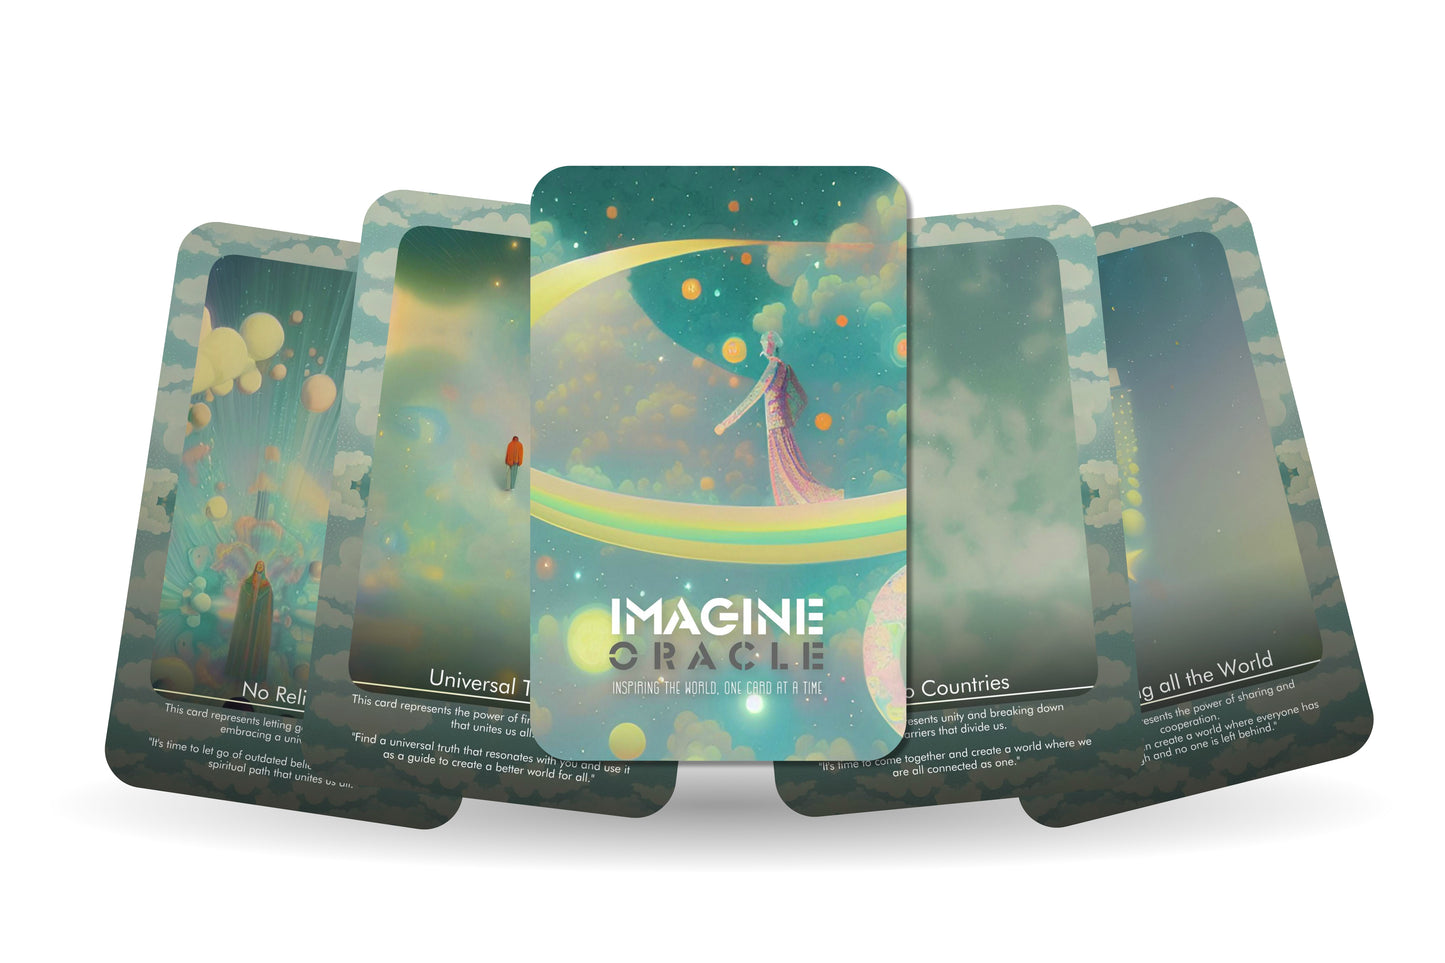 Imagine Oracle - inspired by the song of John Lennon